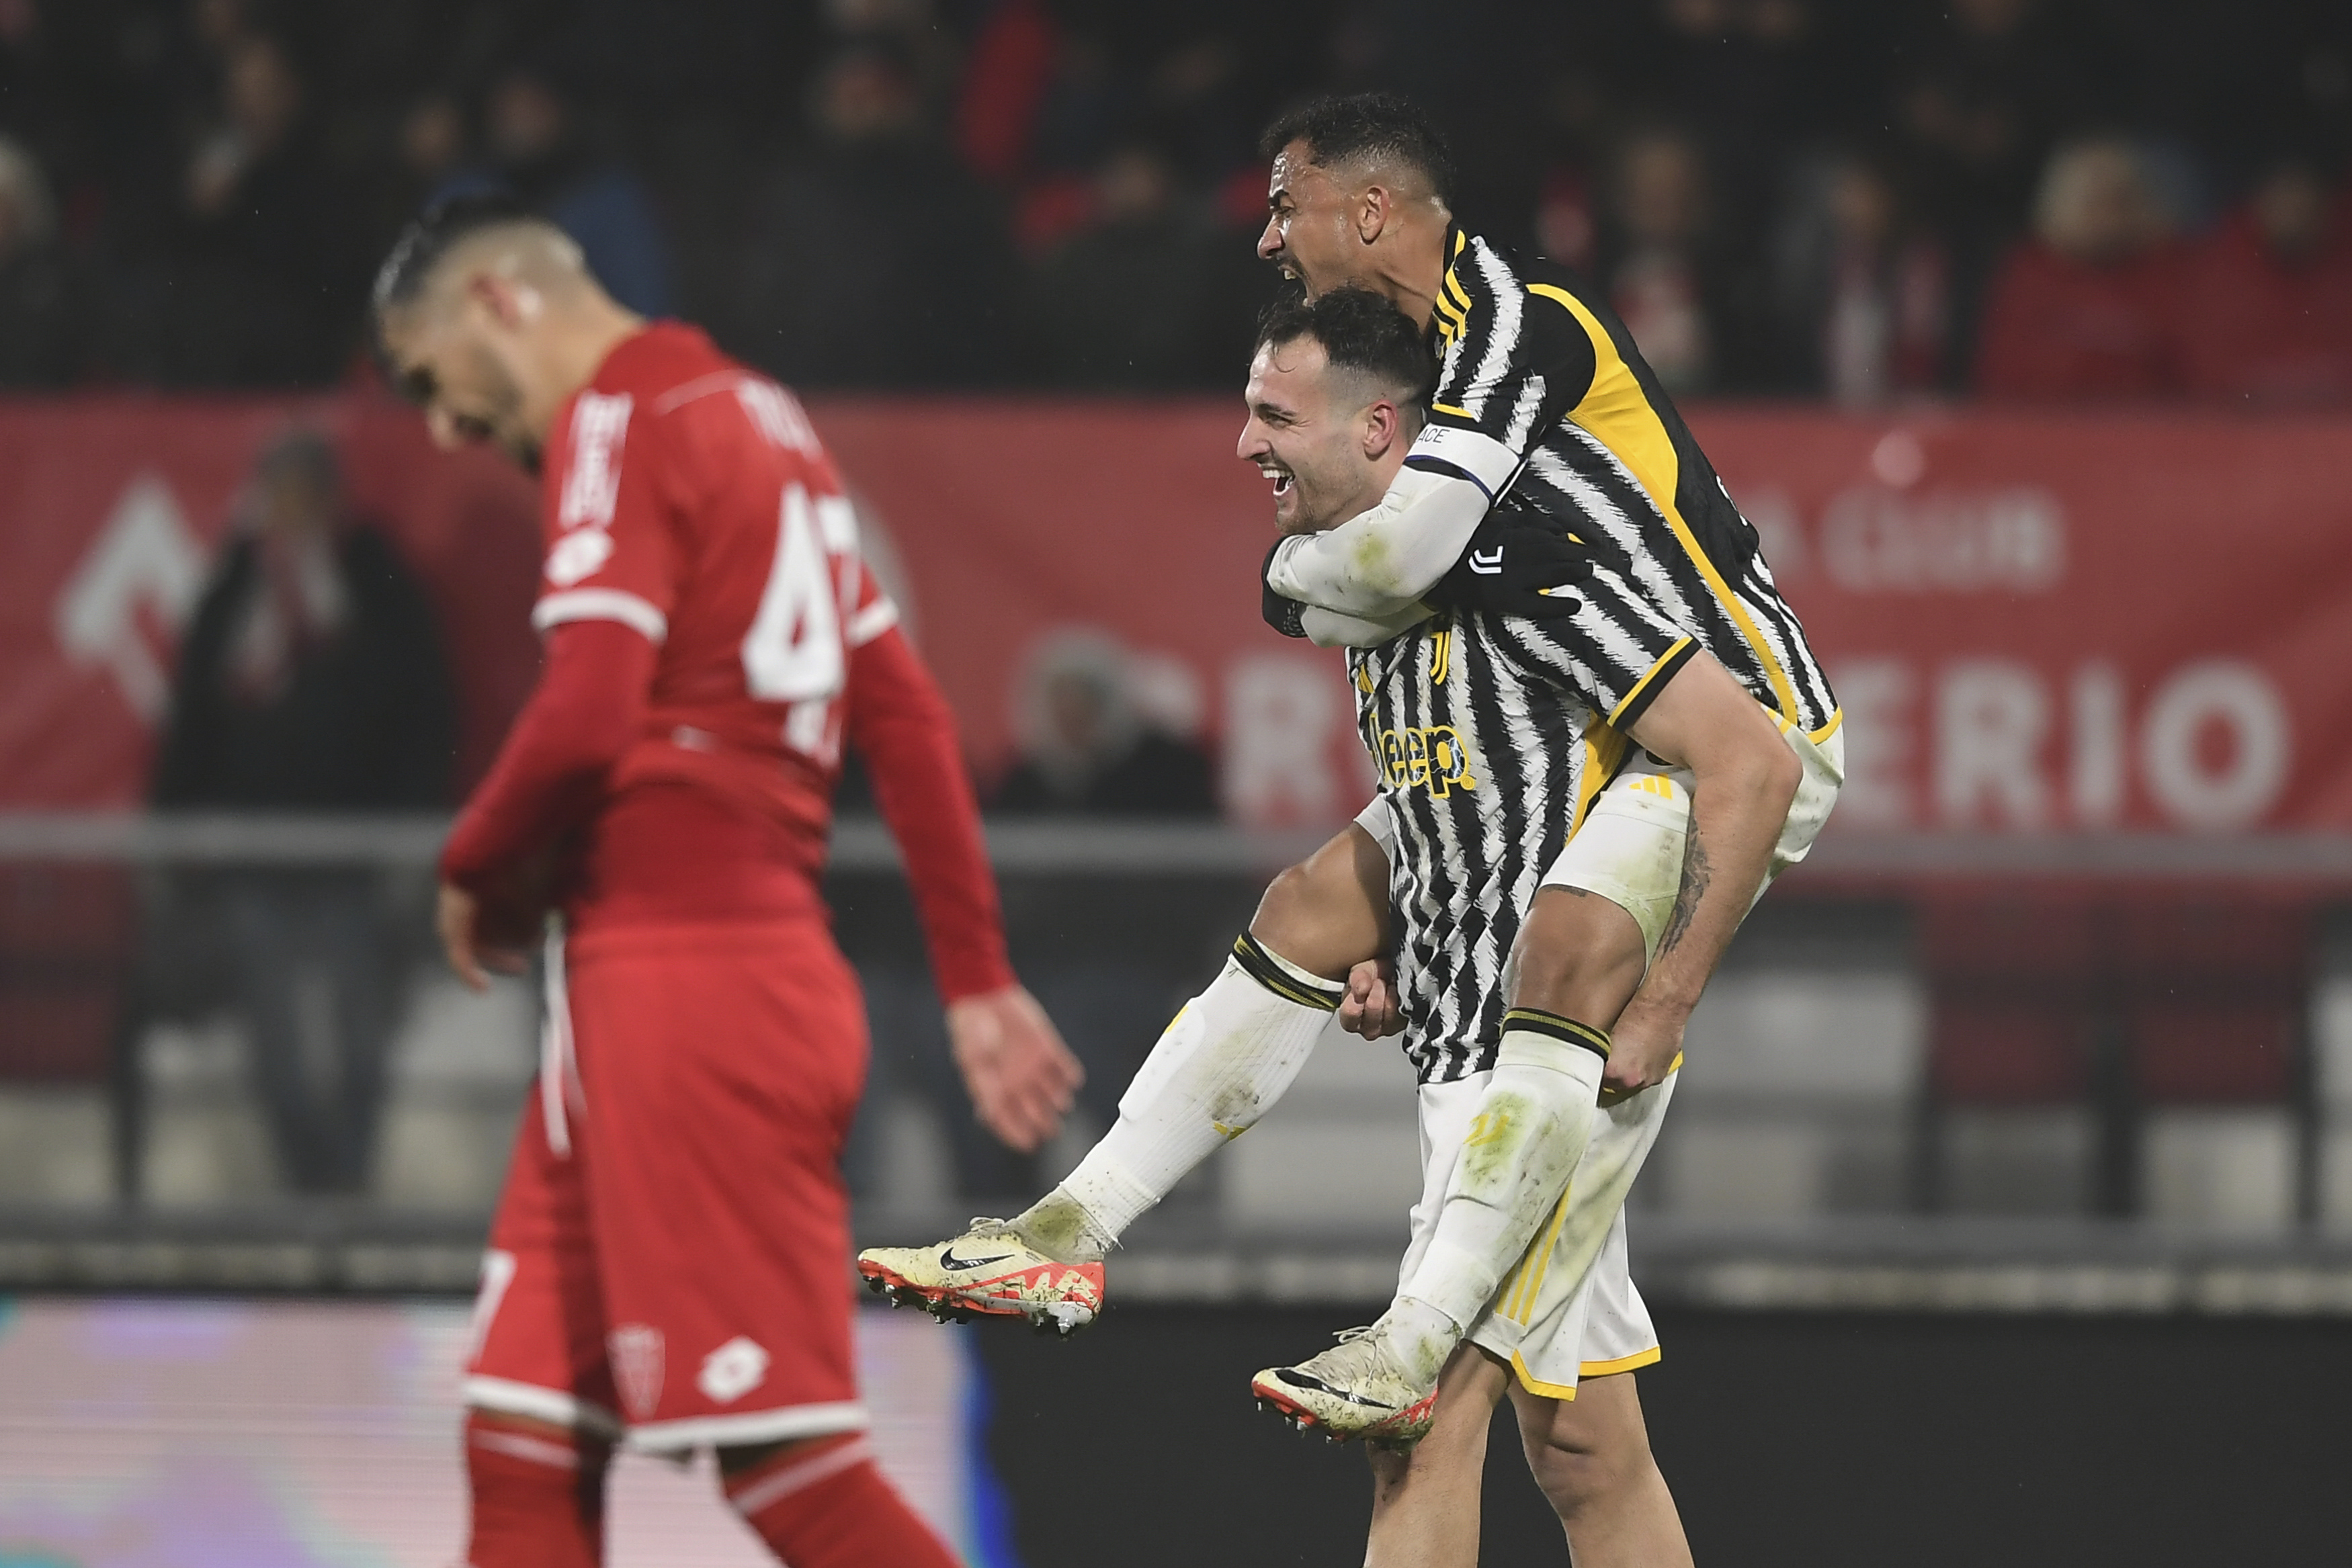 Juventus’s Federico Gatti hit a late winner for the Serie A giants